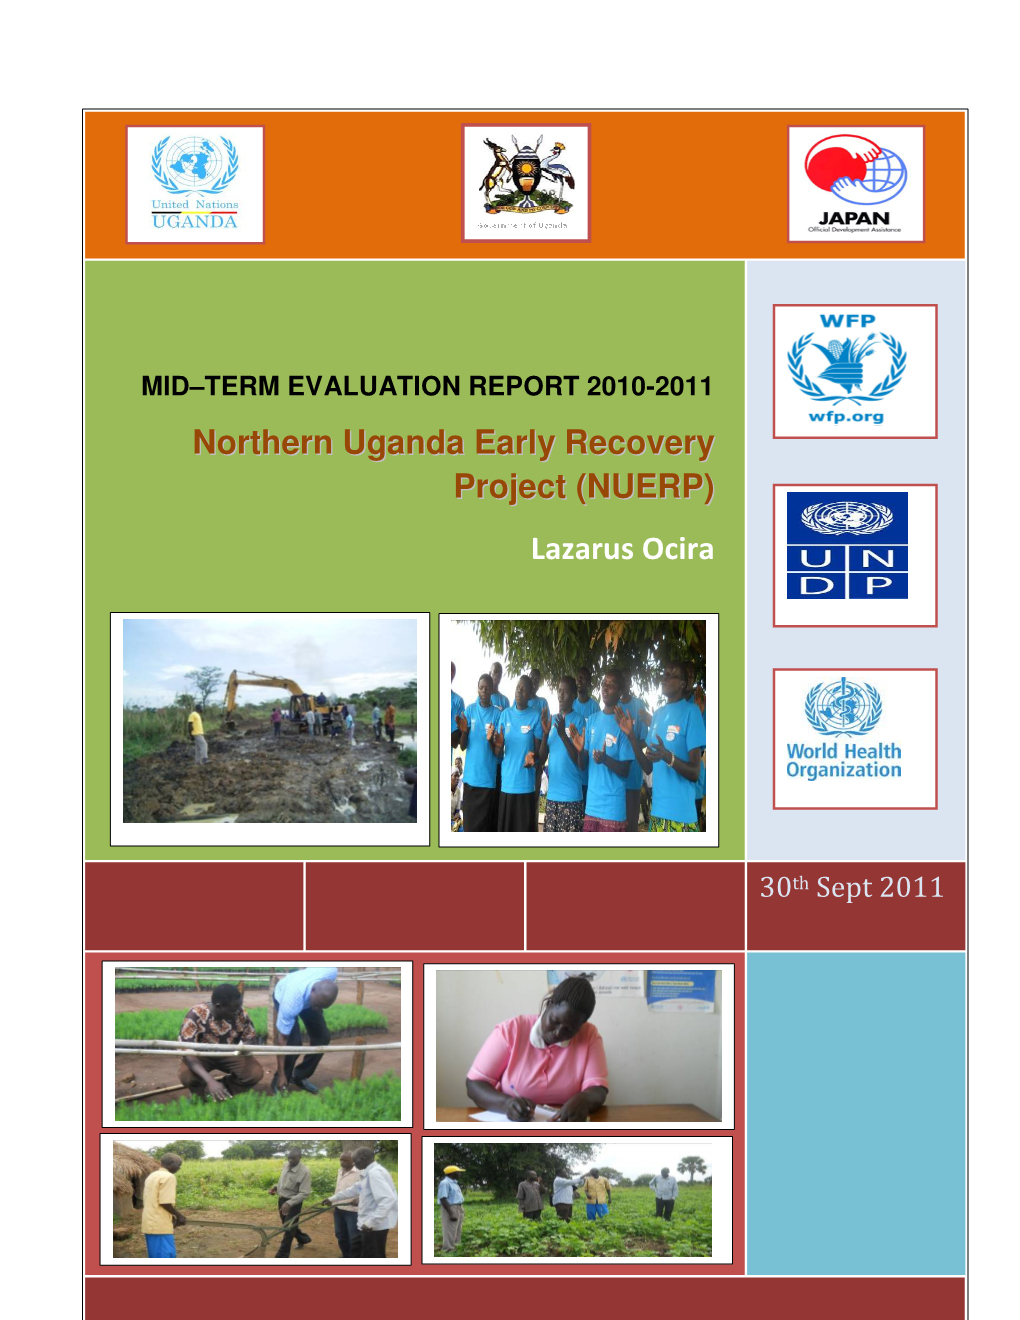 Northern Uganda Early Recovery Project (NUERP)